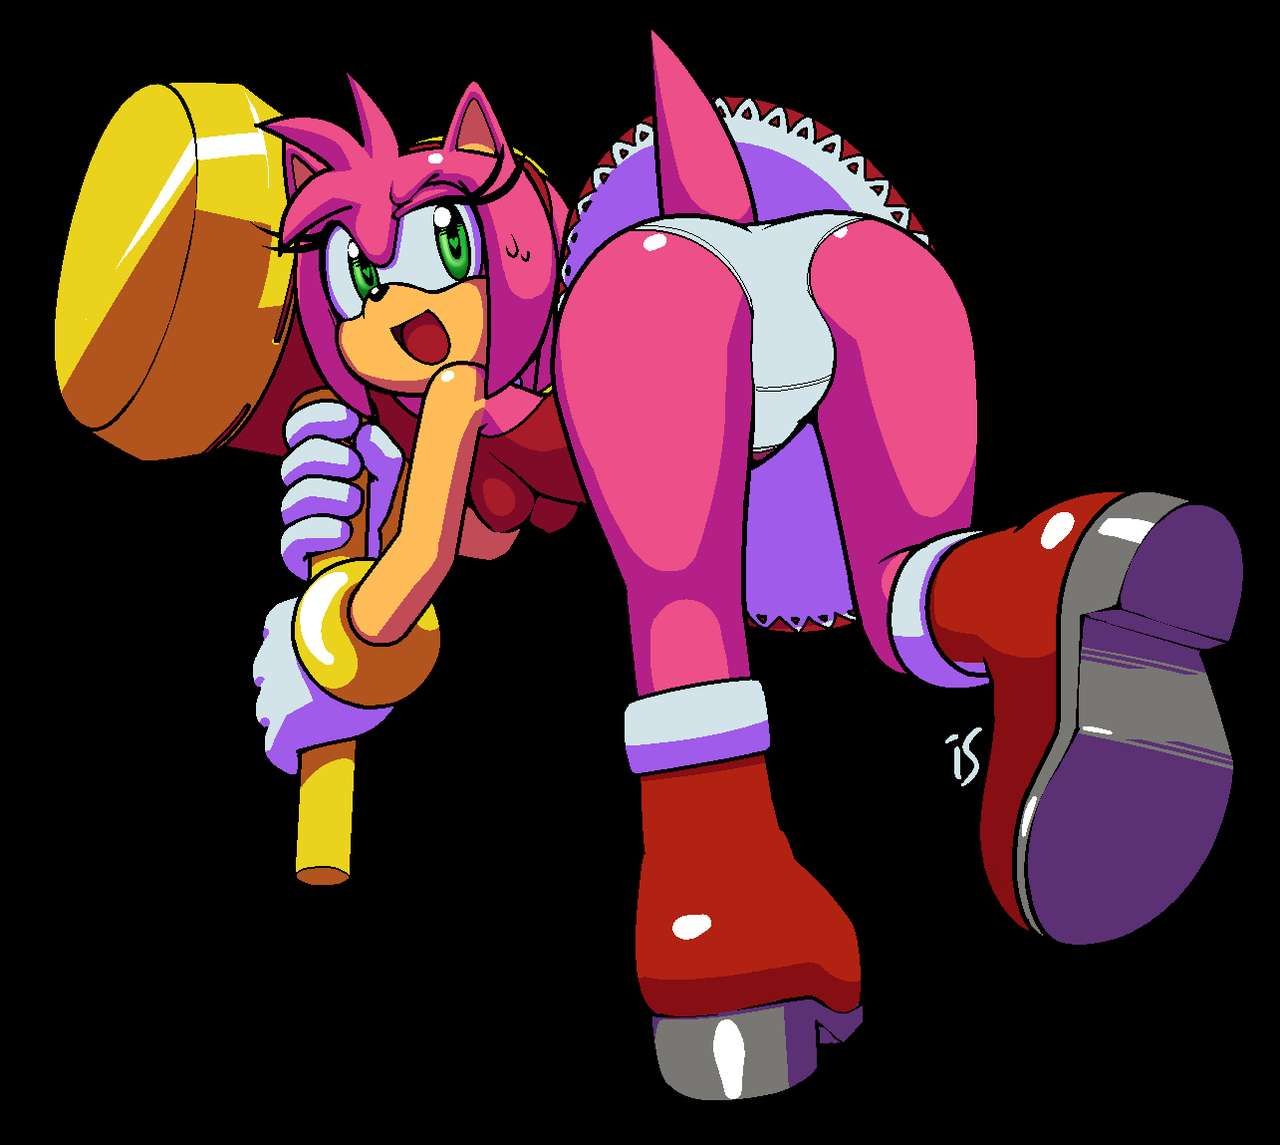 Amy Rose Collection - Hotred/isadultart 21